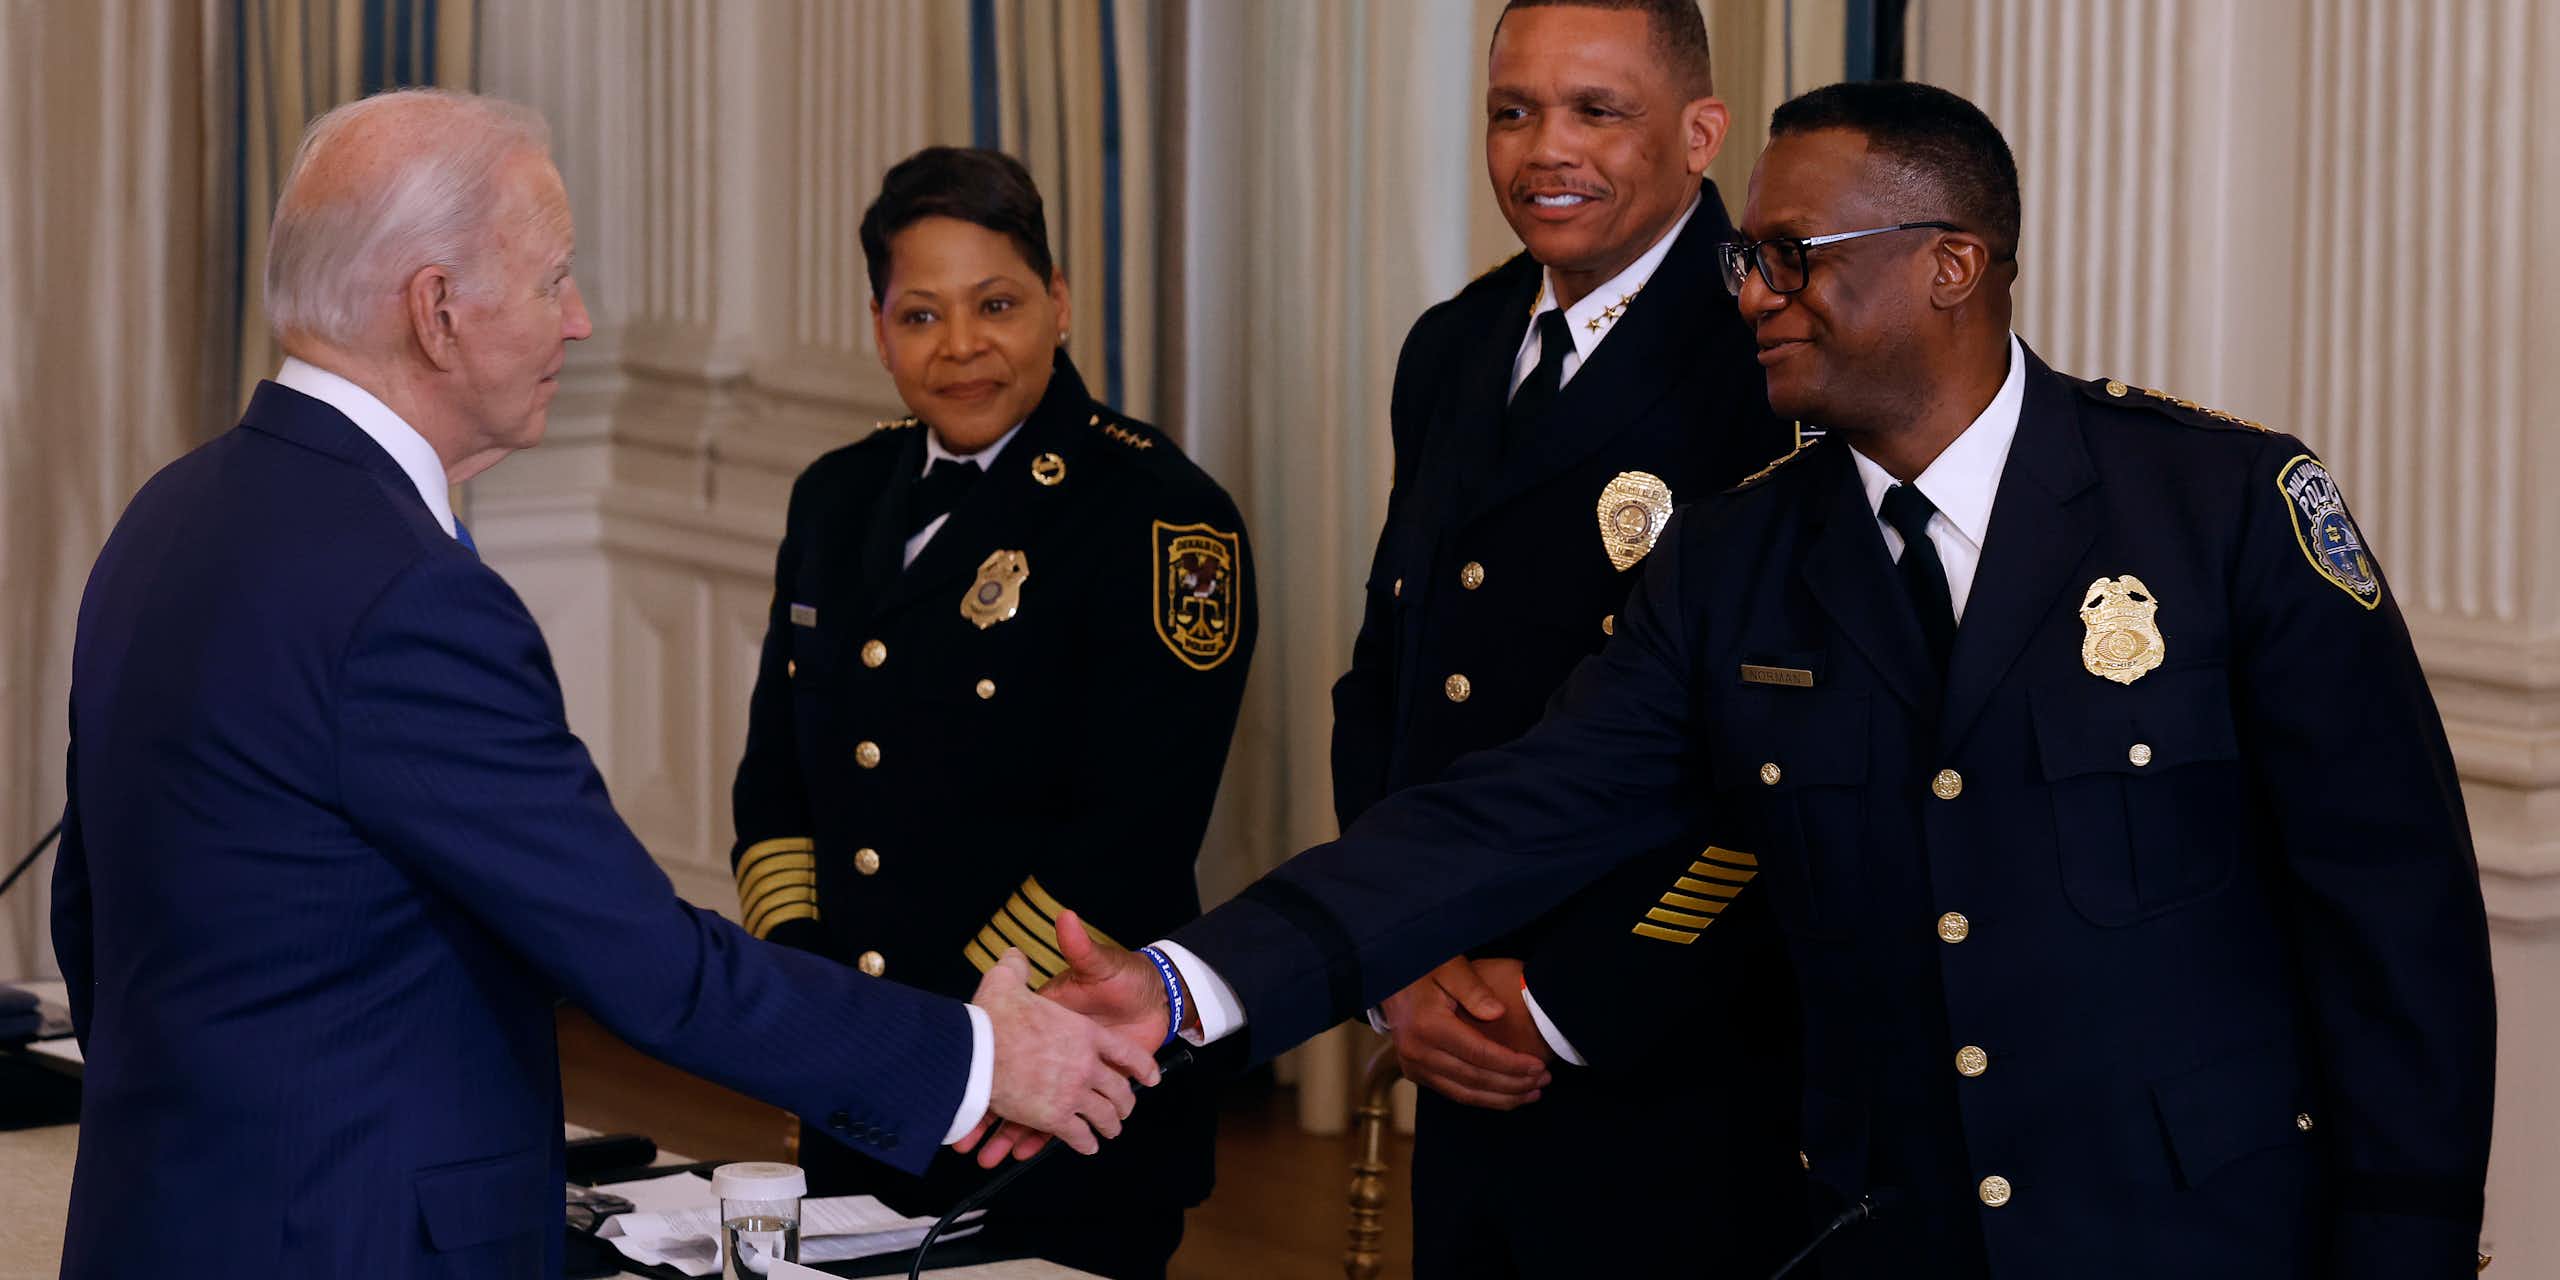 An elderly white man dressed in a business suit greets three Black police chiefs and shakes one of their hands.